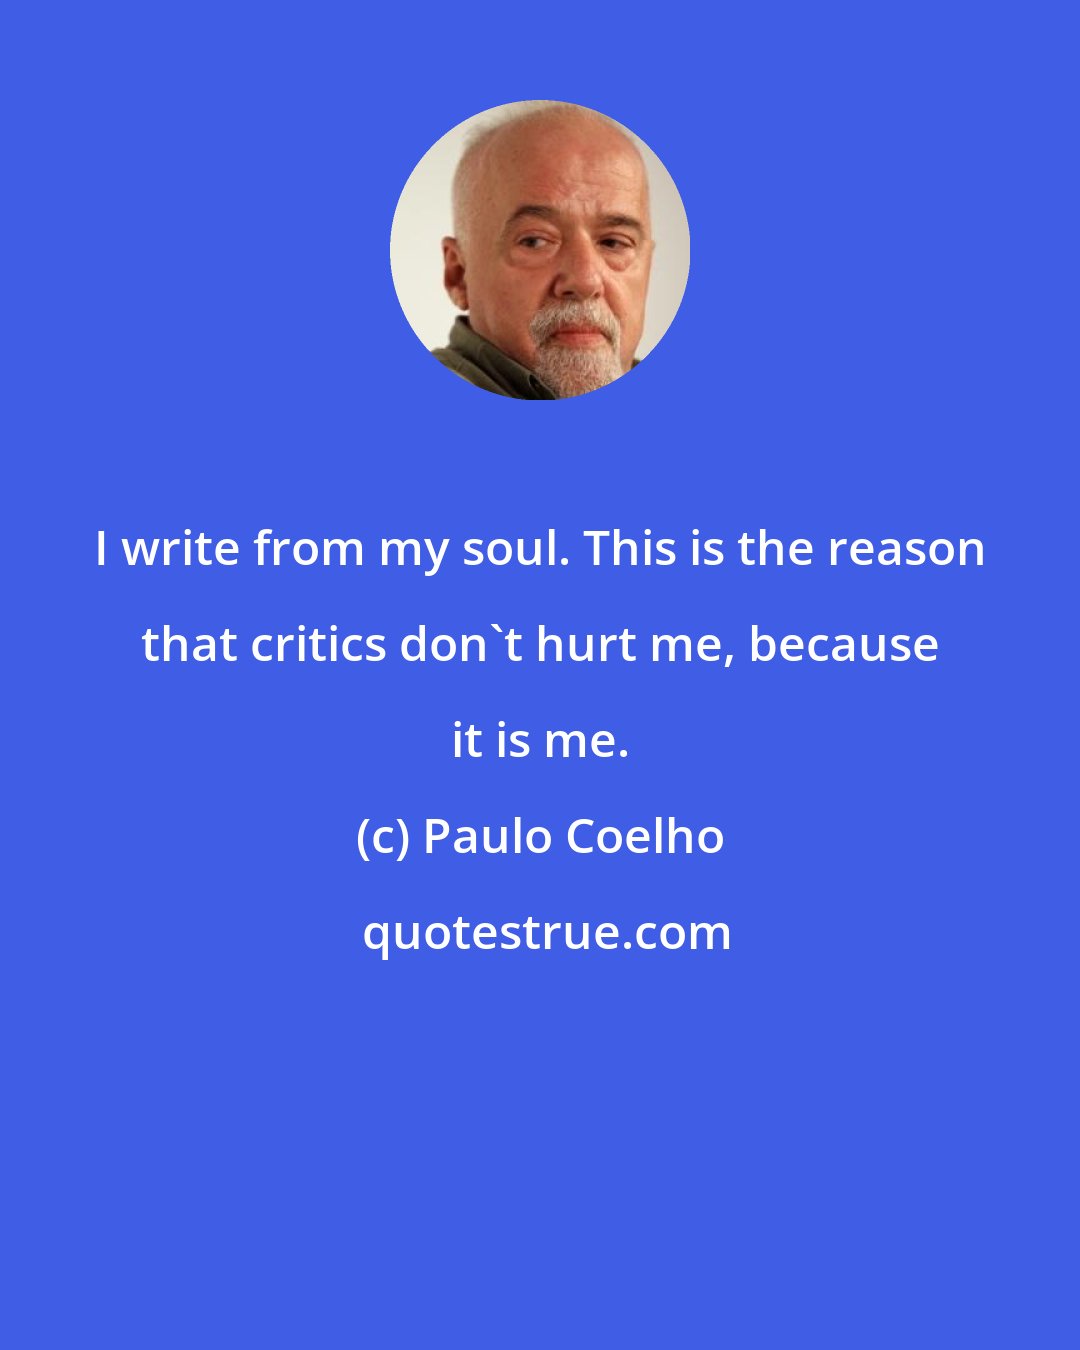 Paulo Coelho: I write from my soul. This is the reason that critics don't hurt me, because it is me.